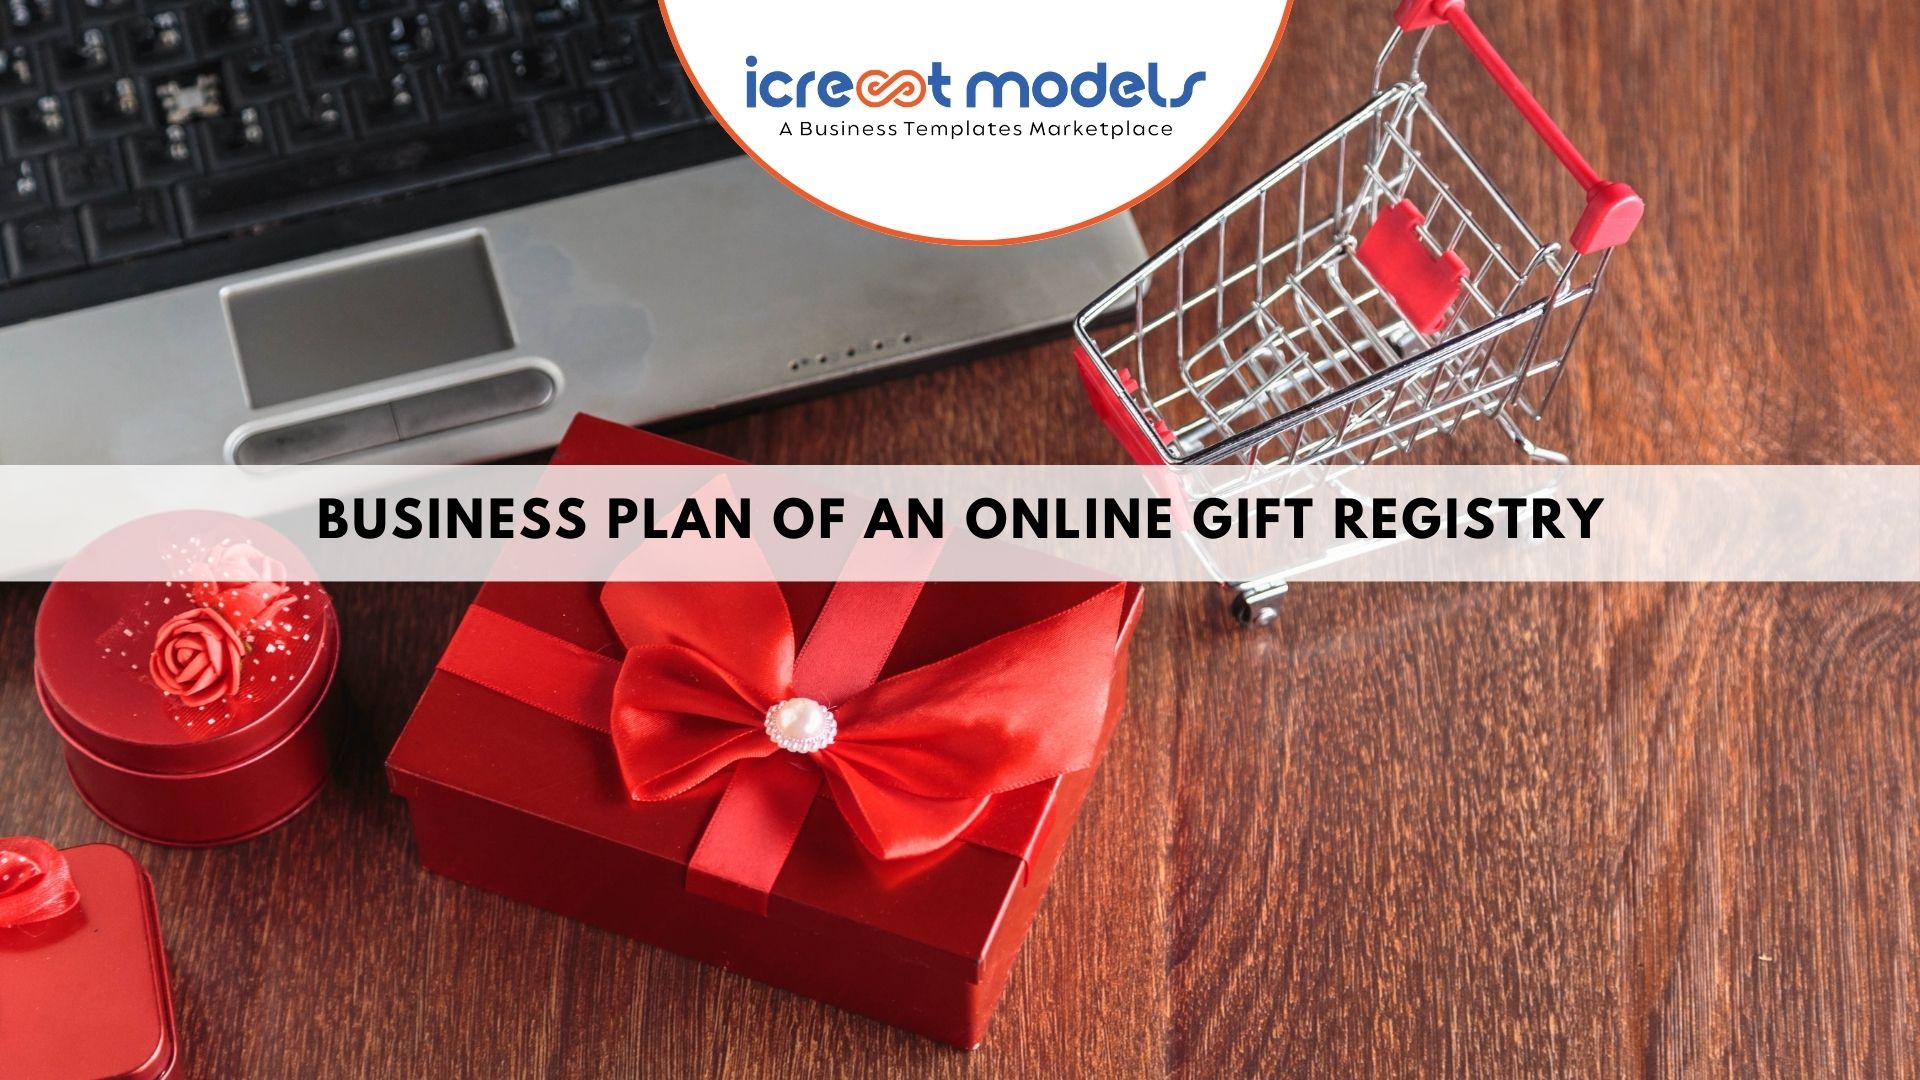 Business Plan of an Online Gift Registry